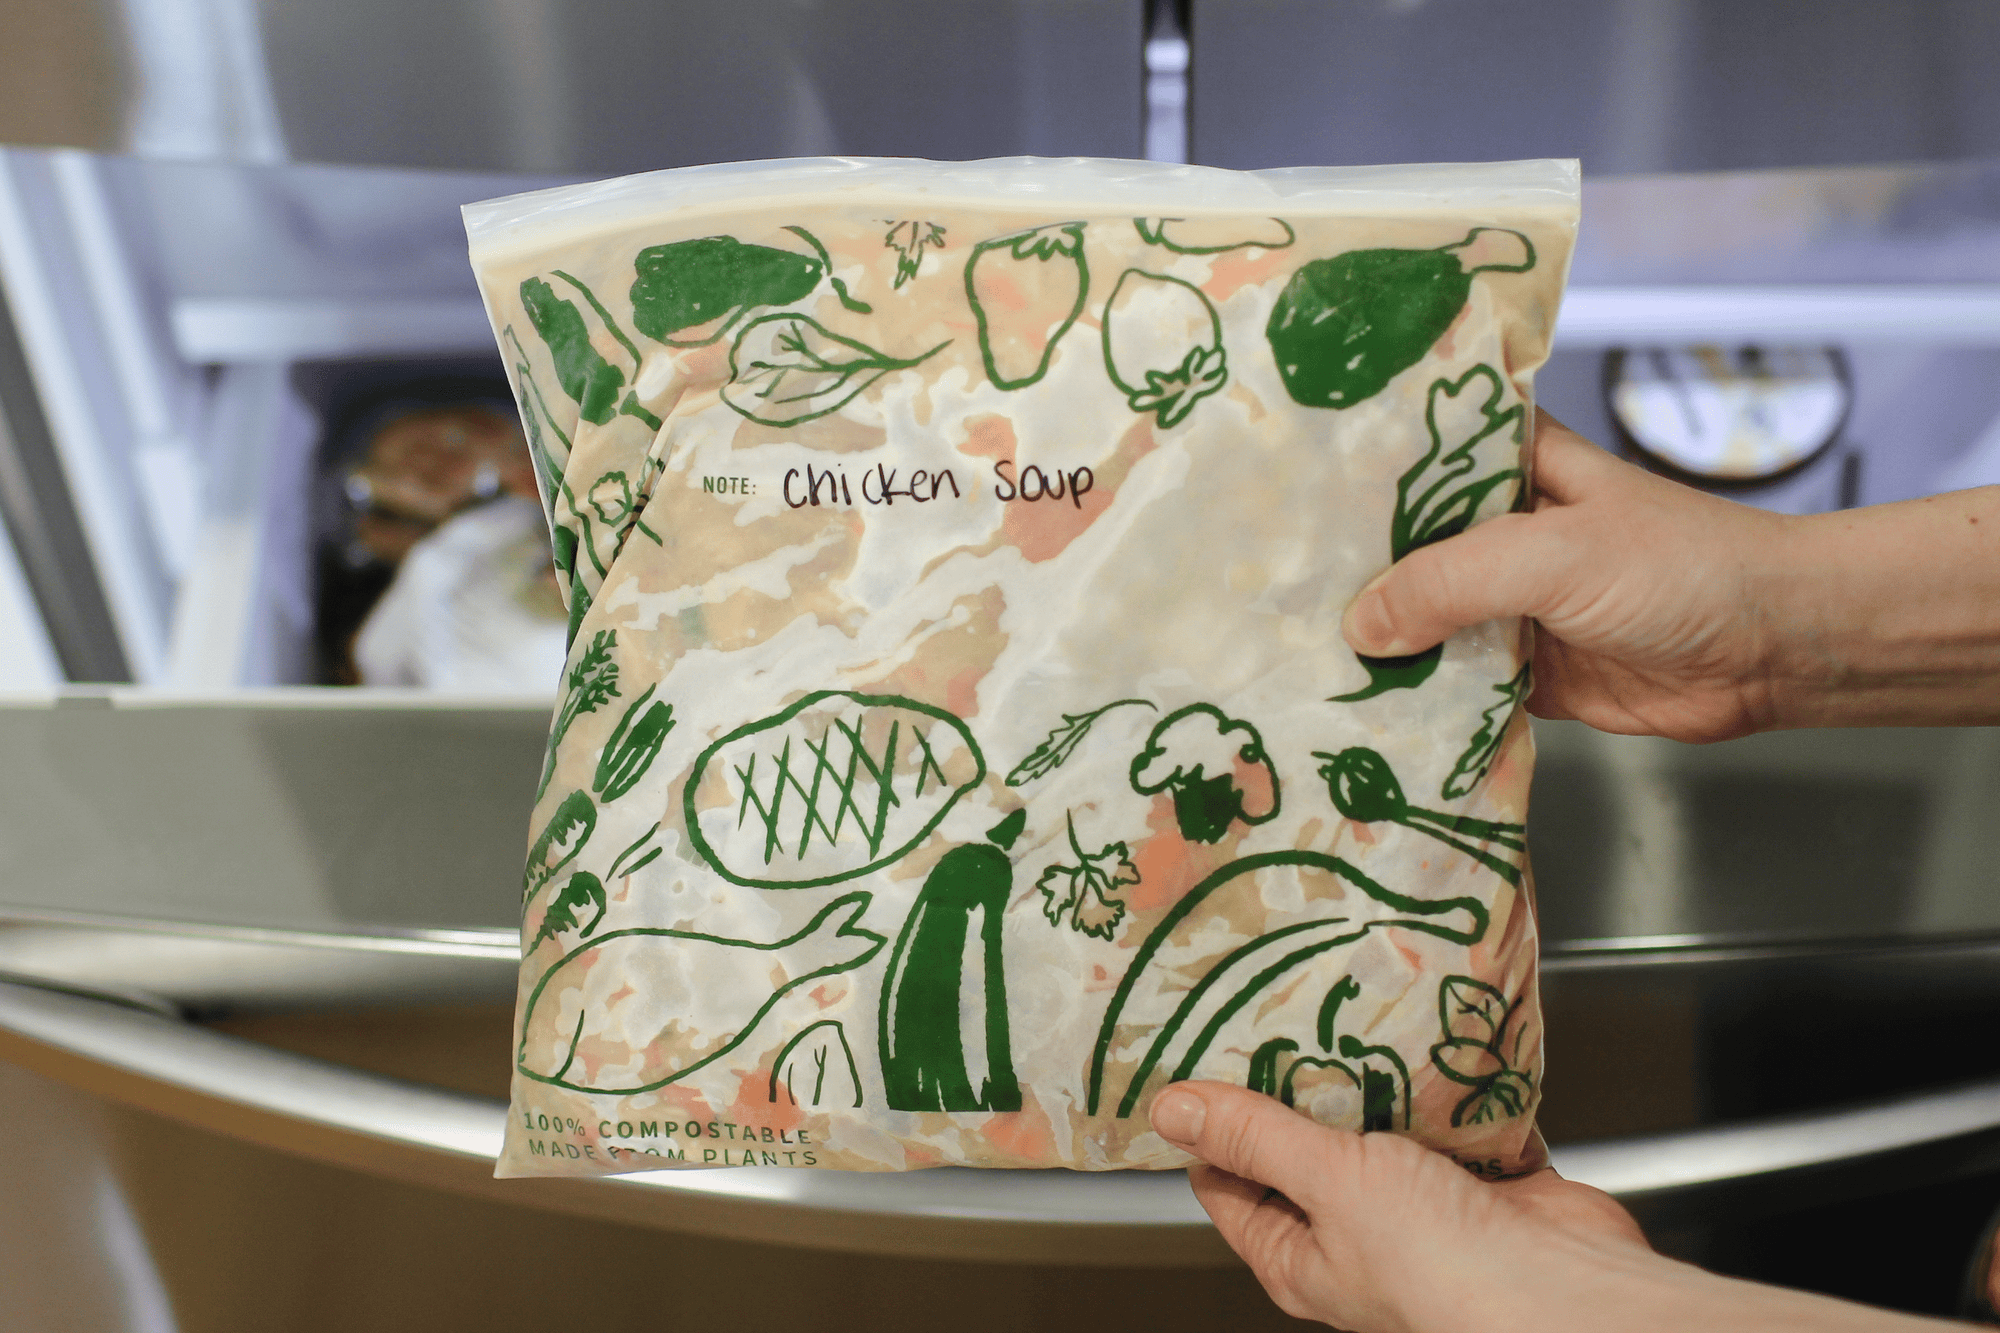 COMPOSTABLE GALLON BAG MADE FROM PLANTS